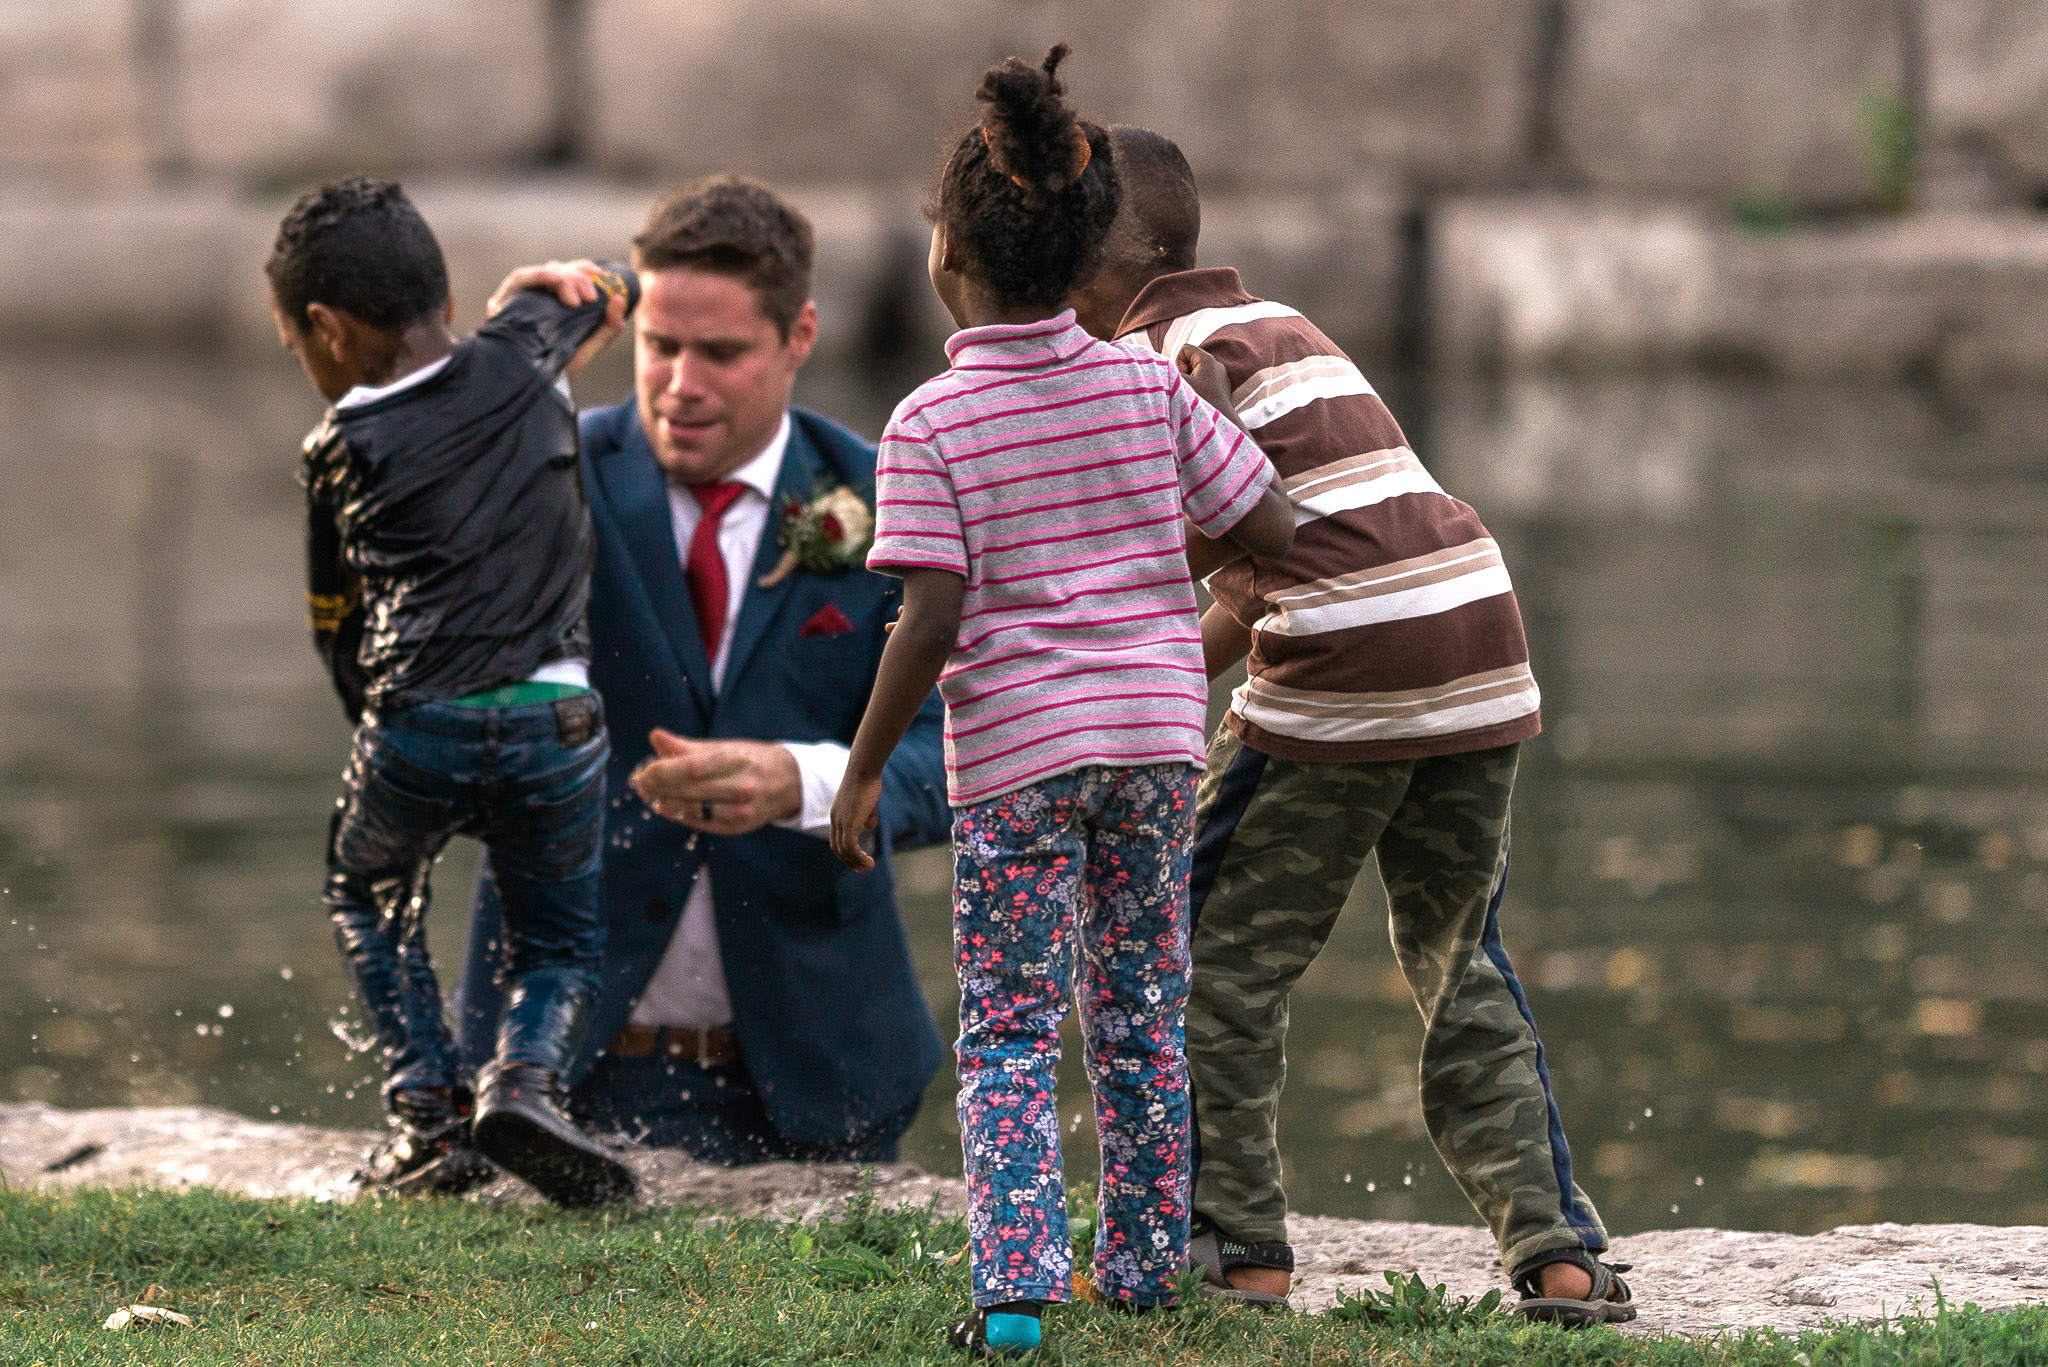 PHOTO: Clay Cook of Cambridge, Canada, rescued a little boy struggling in nearby water during his wedding photo shoot on Sept. 22.